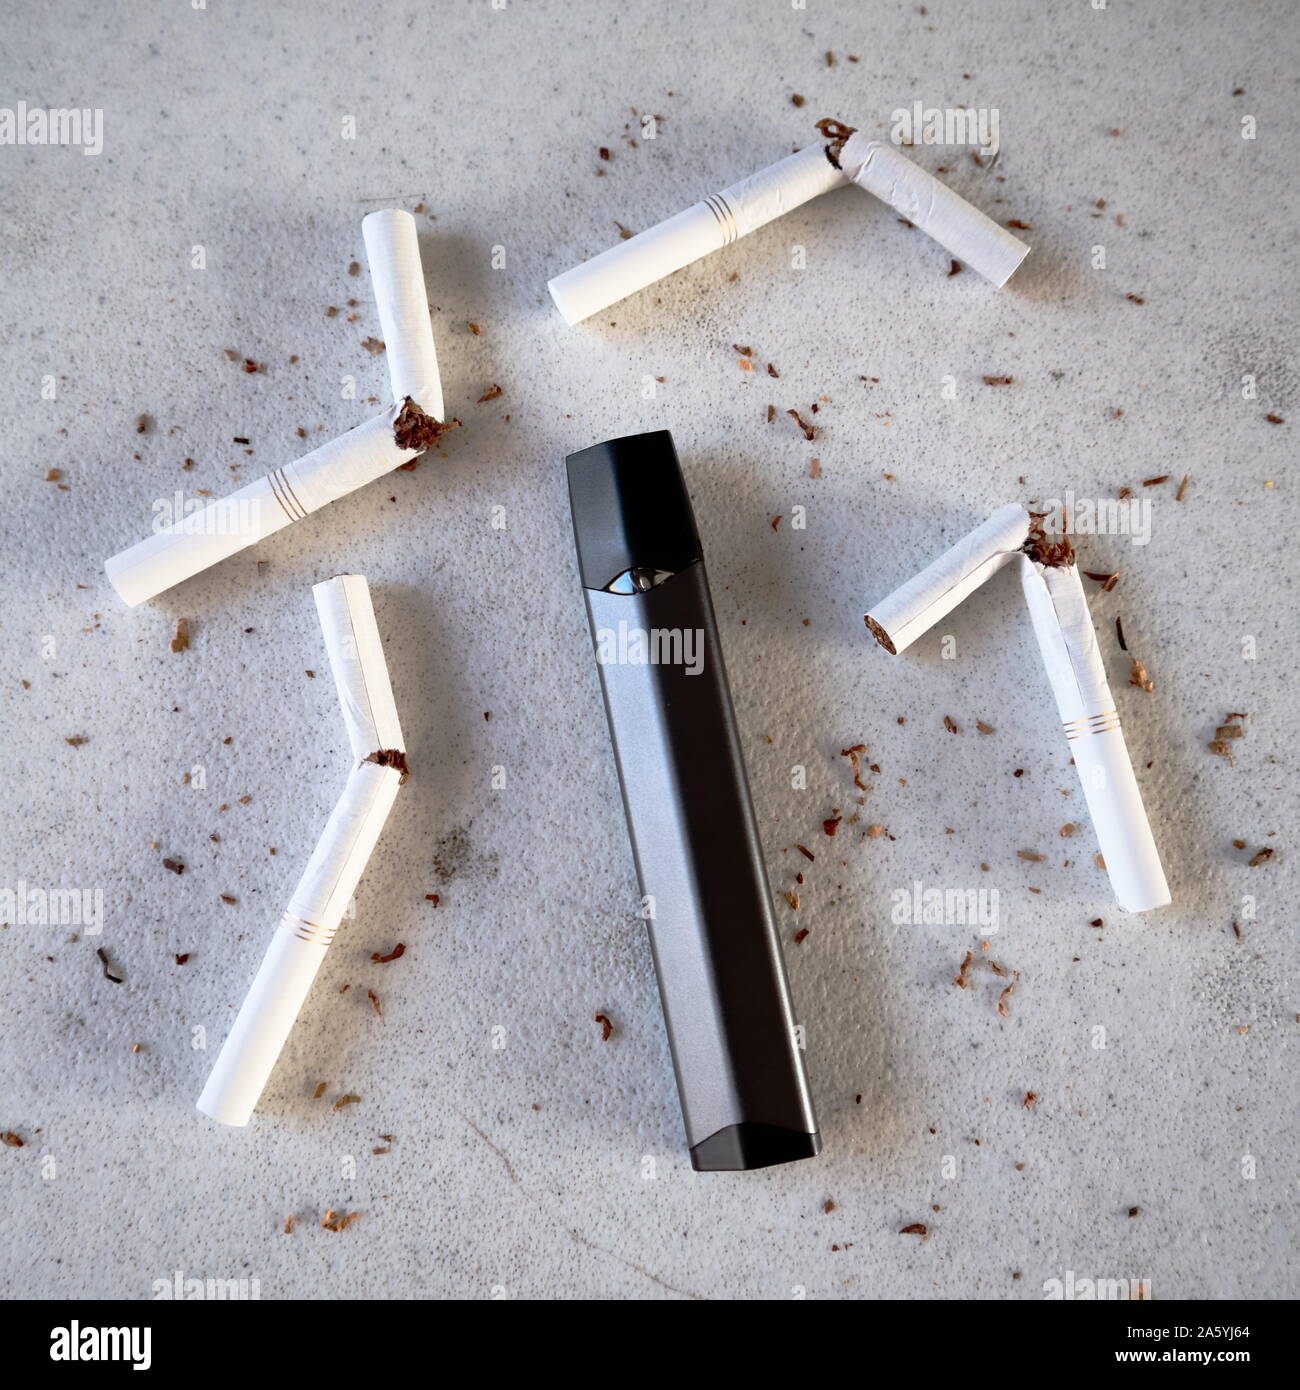 Single vape pen type electronic cigarette as smoking alternative with broken cigarettes and scattered tobacco on white textured background isolated Stock Photo